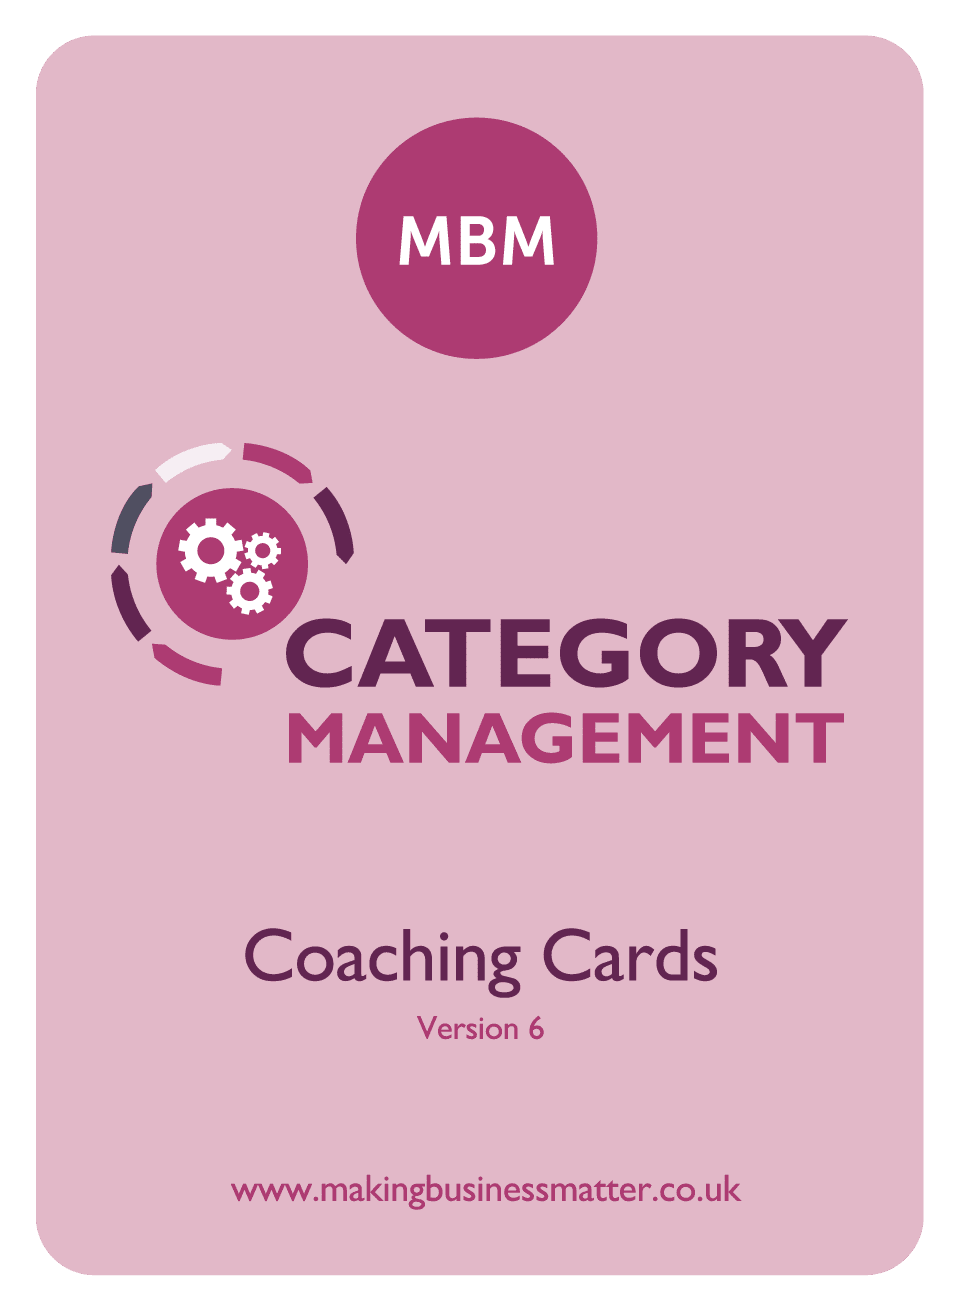 Front of category management coaching card